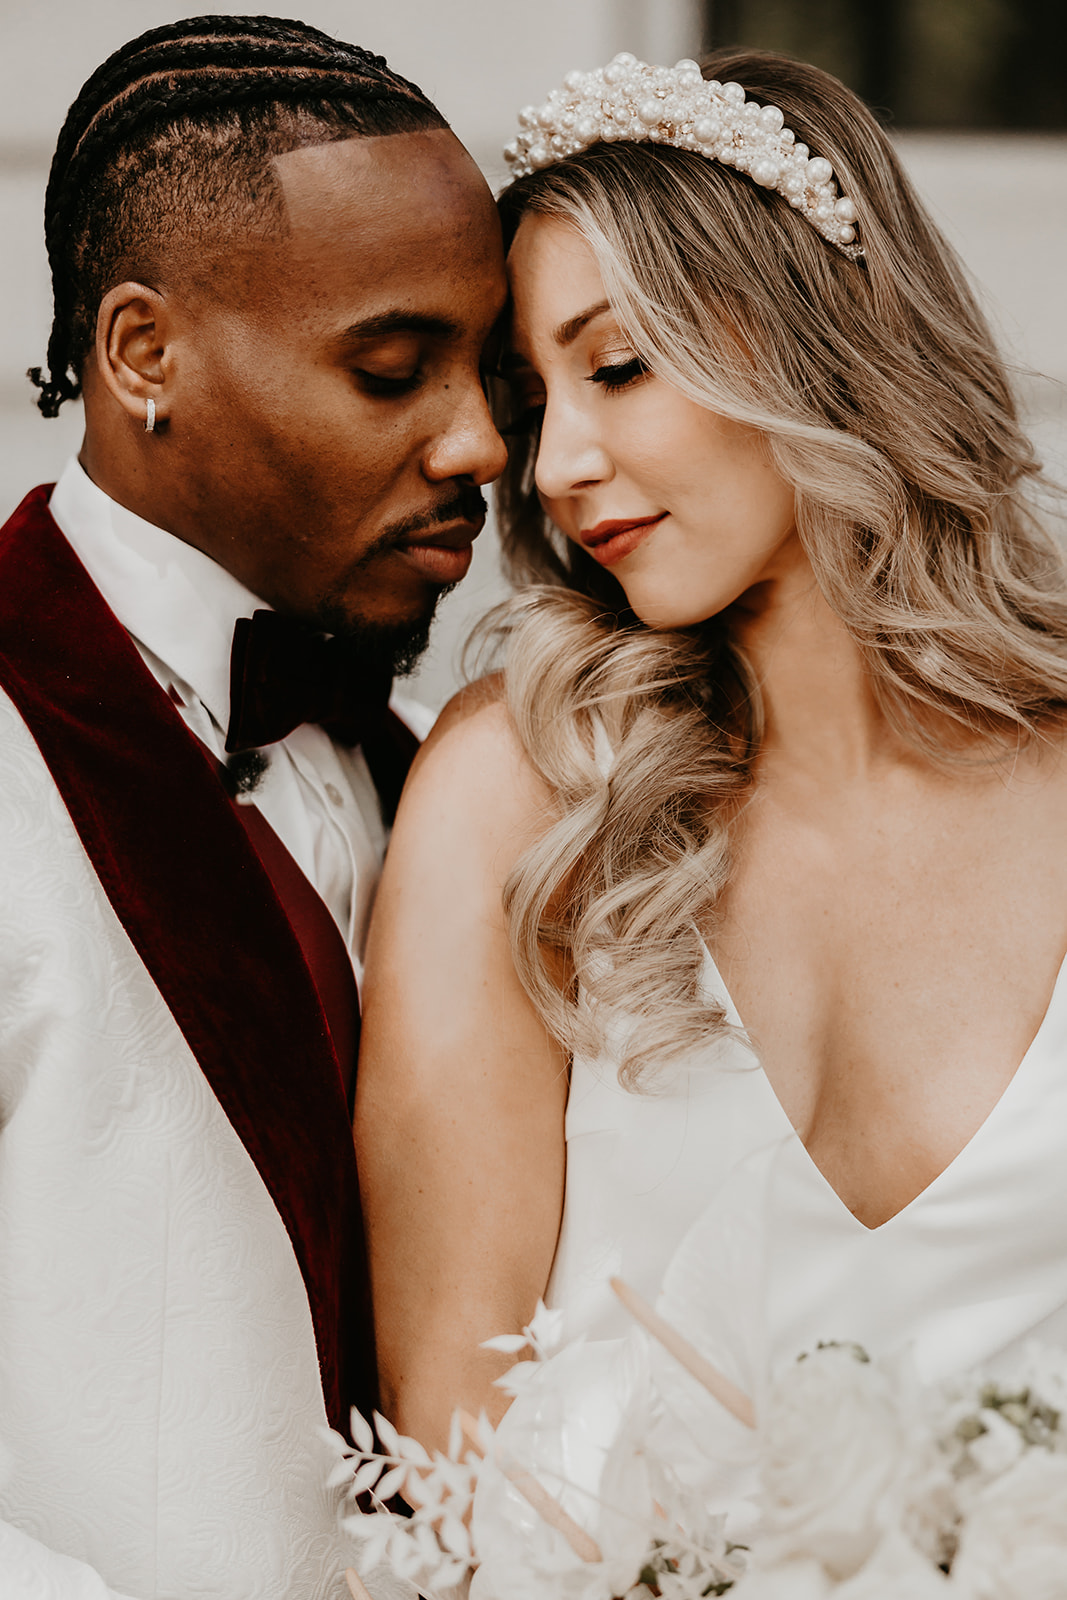 Sleek and stylish wedding portrait in the heart of downtown Cleveland - showcasing the couple's sophisticated love.